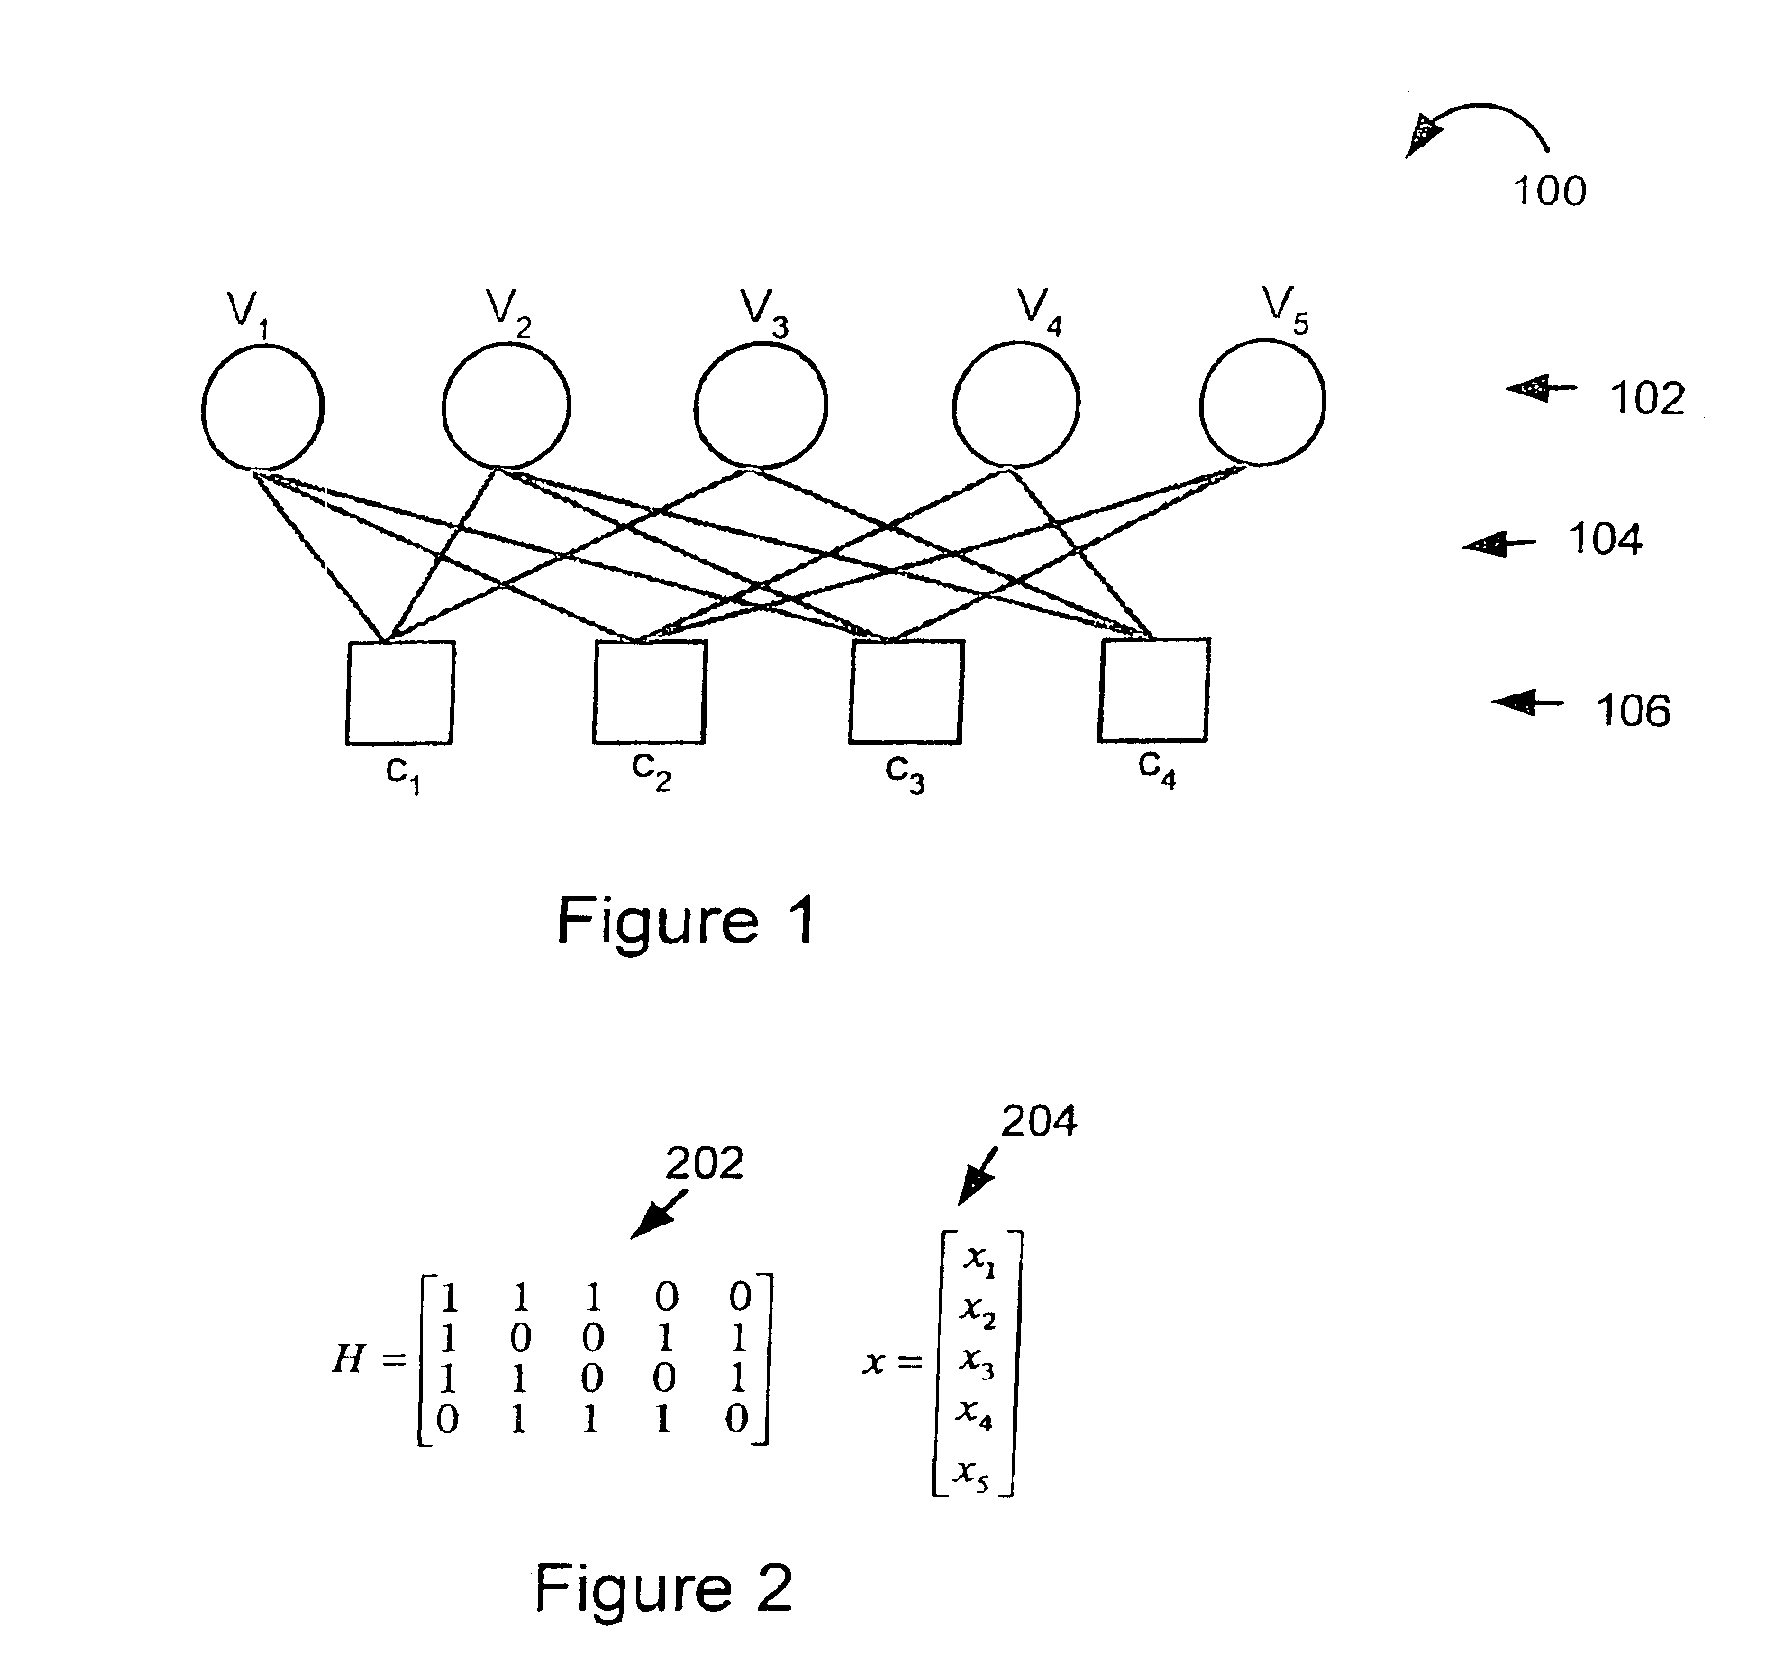 Method and apparatus for performing low-density parity-check (LDPC) code operations using a multi-level permutation